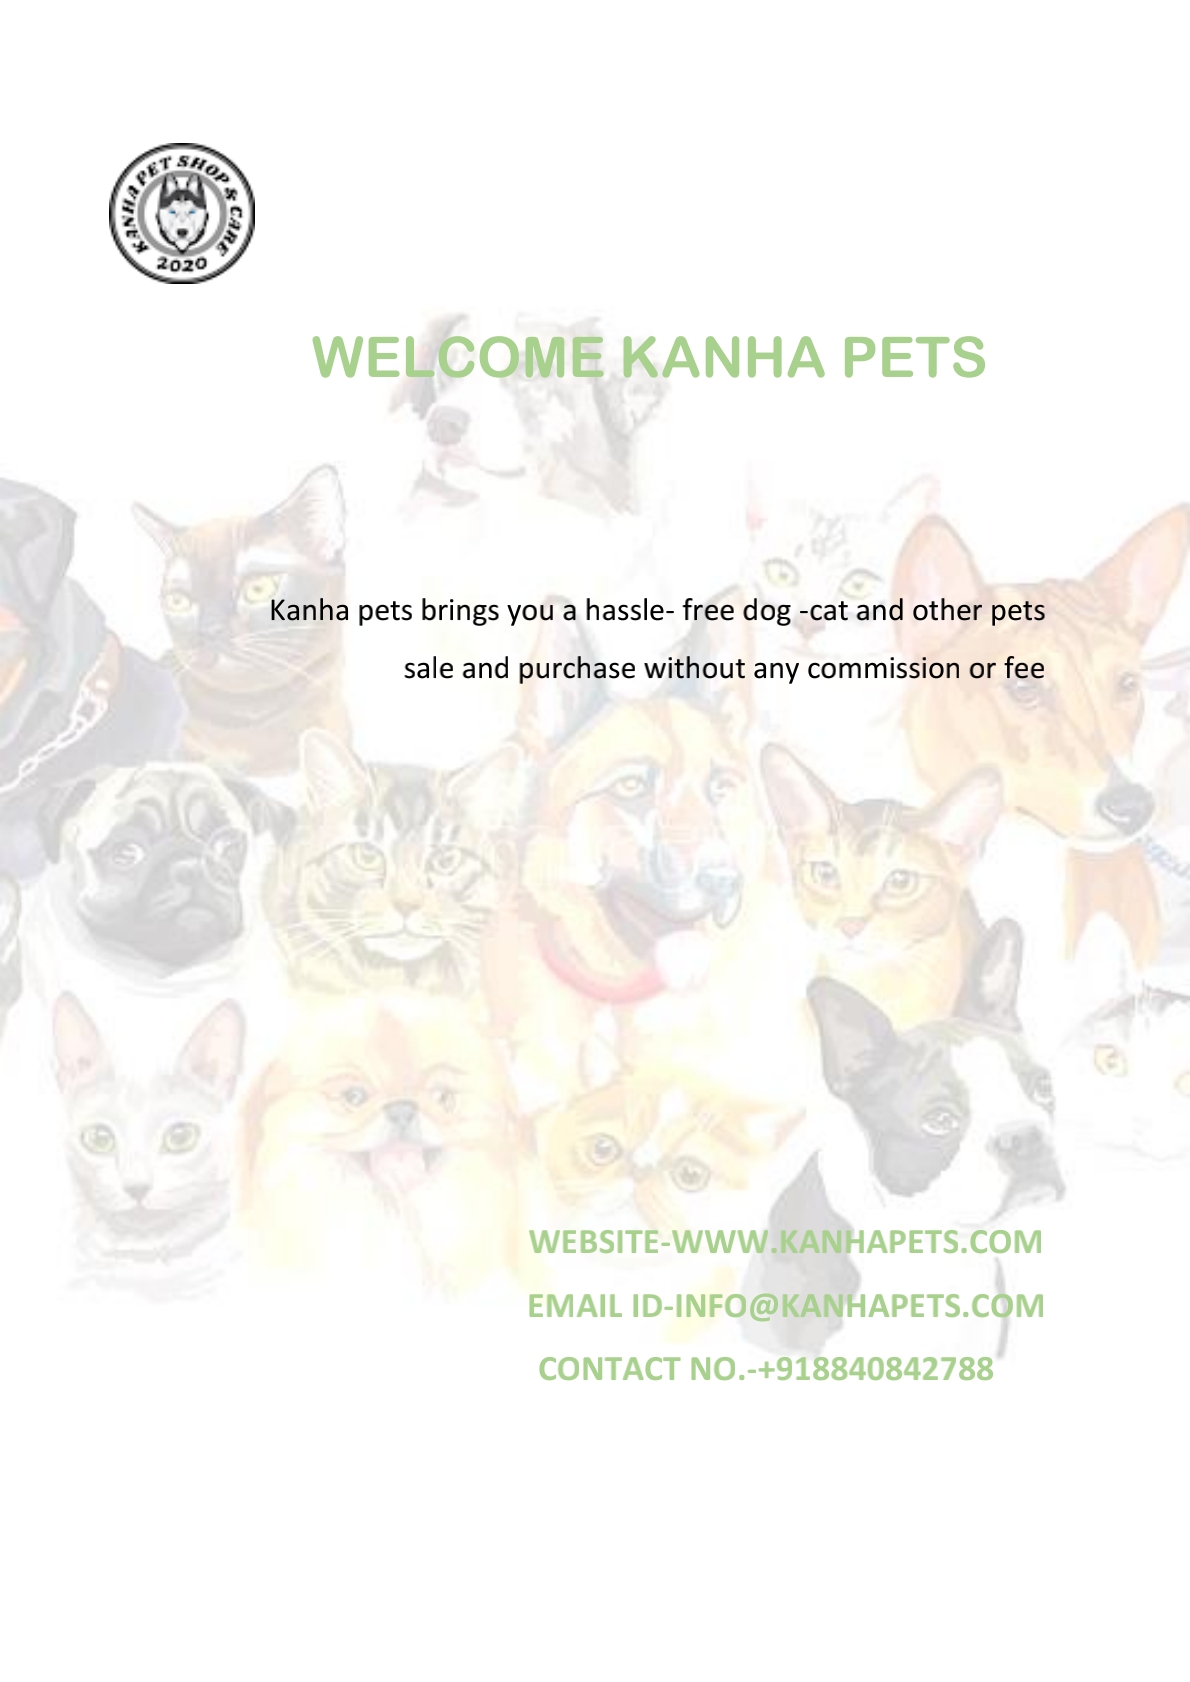 Kanha Pet brings you the best quality pets